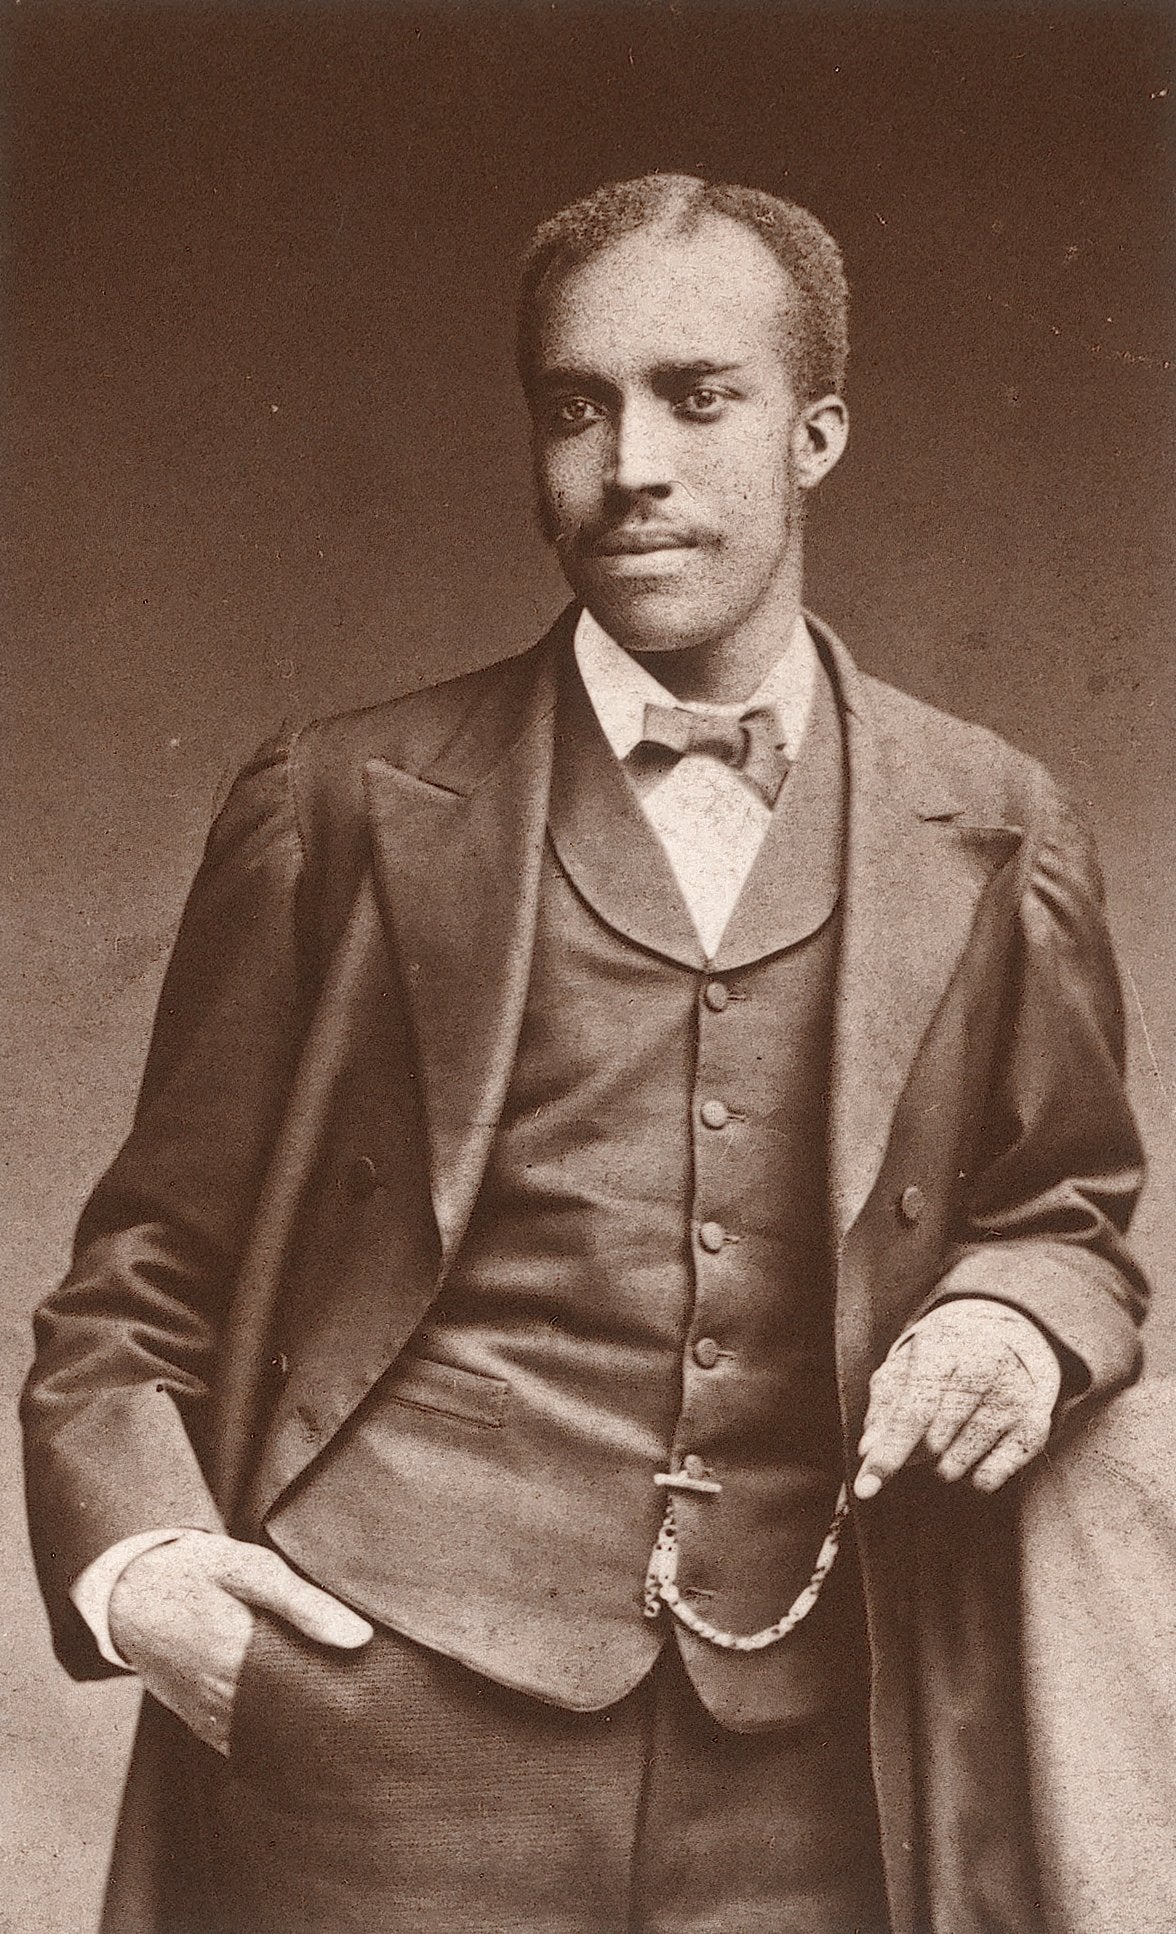 Nathan Francis Mossell, c. 1882